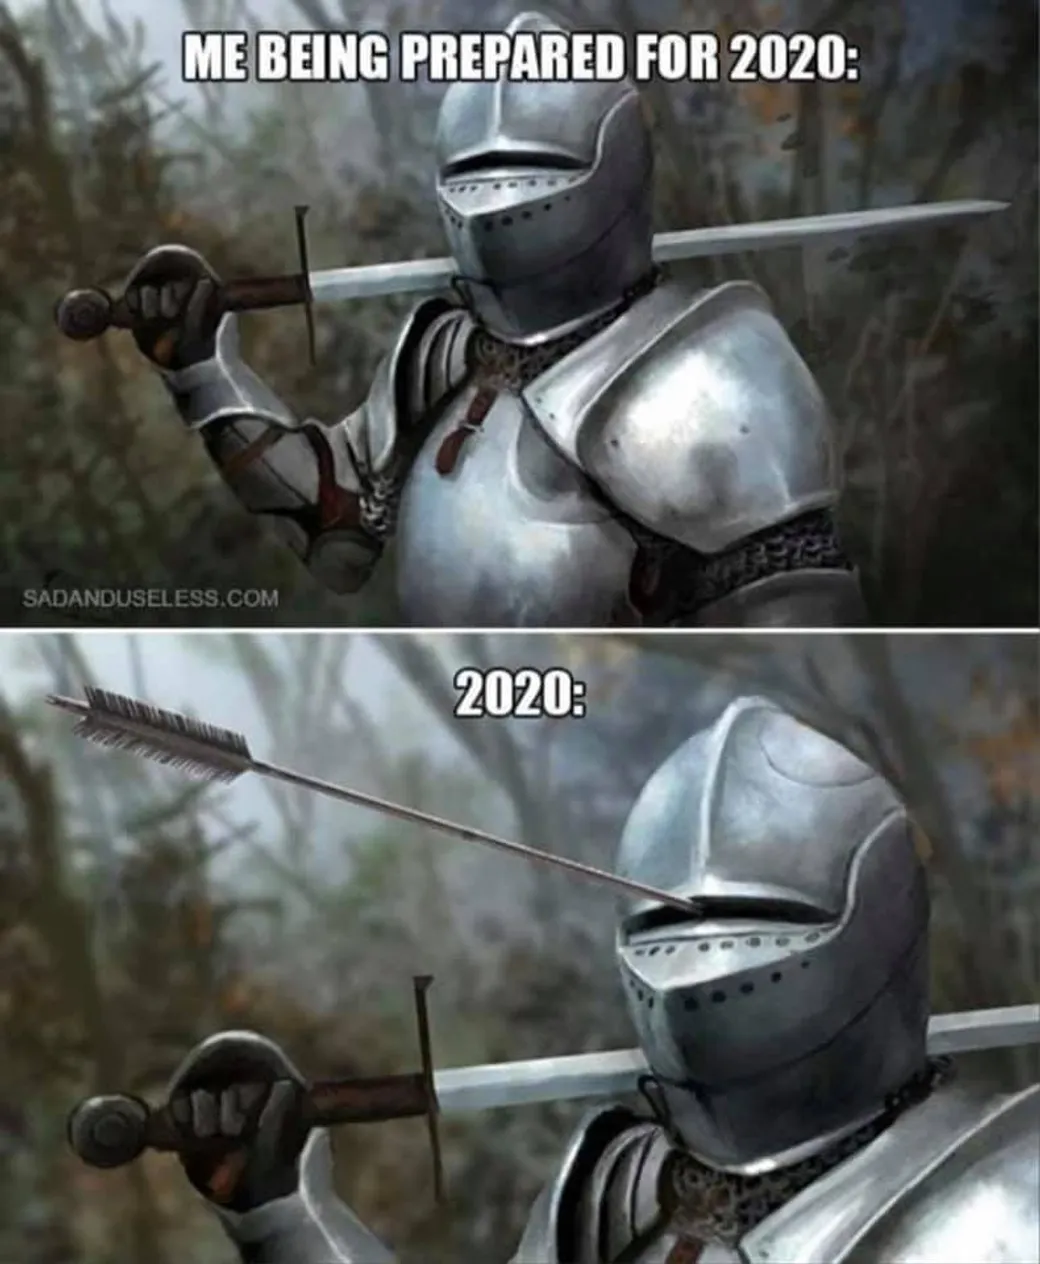 I'm ready for 2020 - 2020, Picture with text, Knights